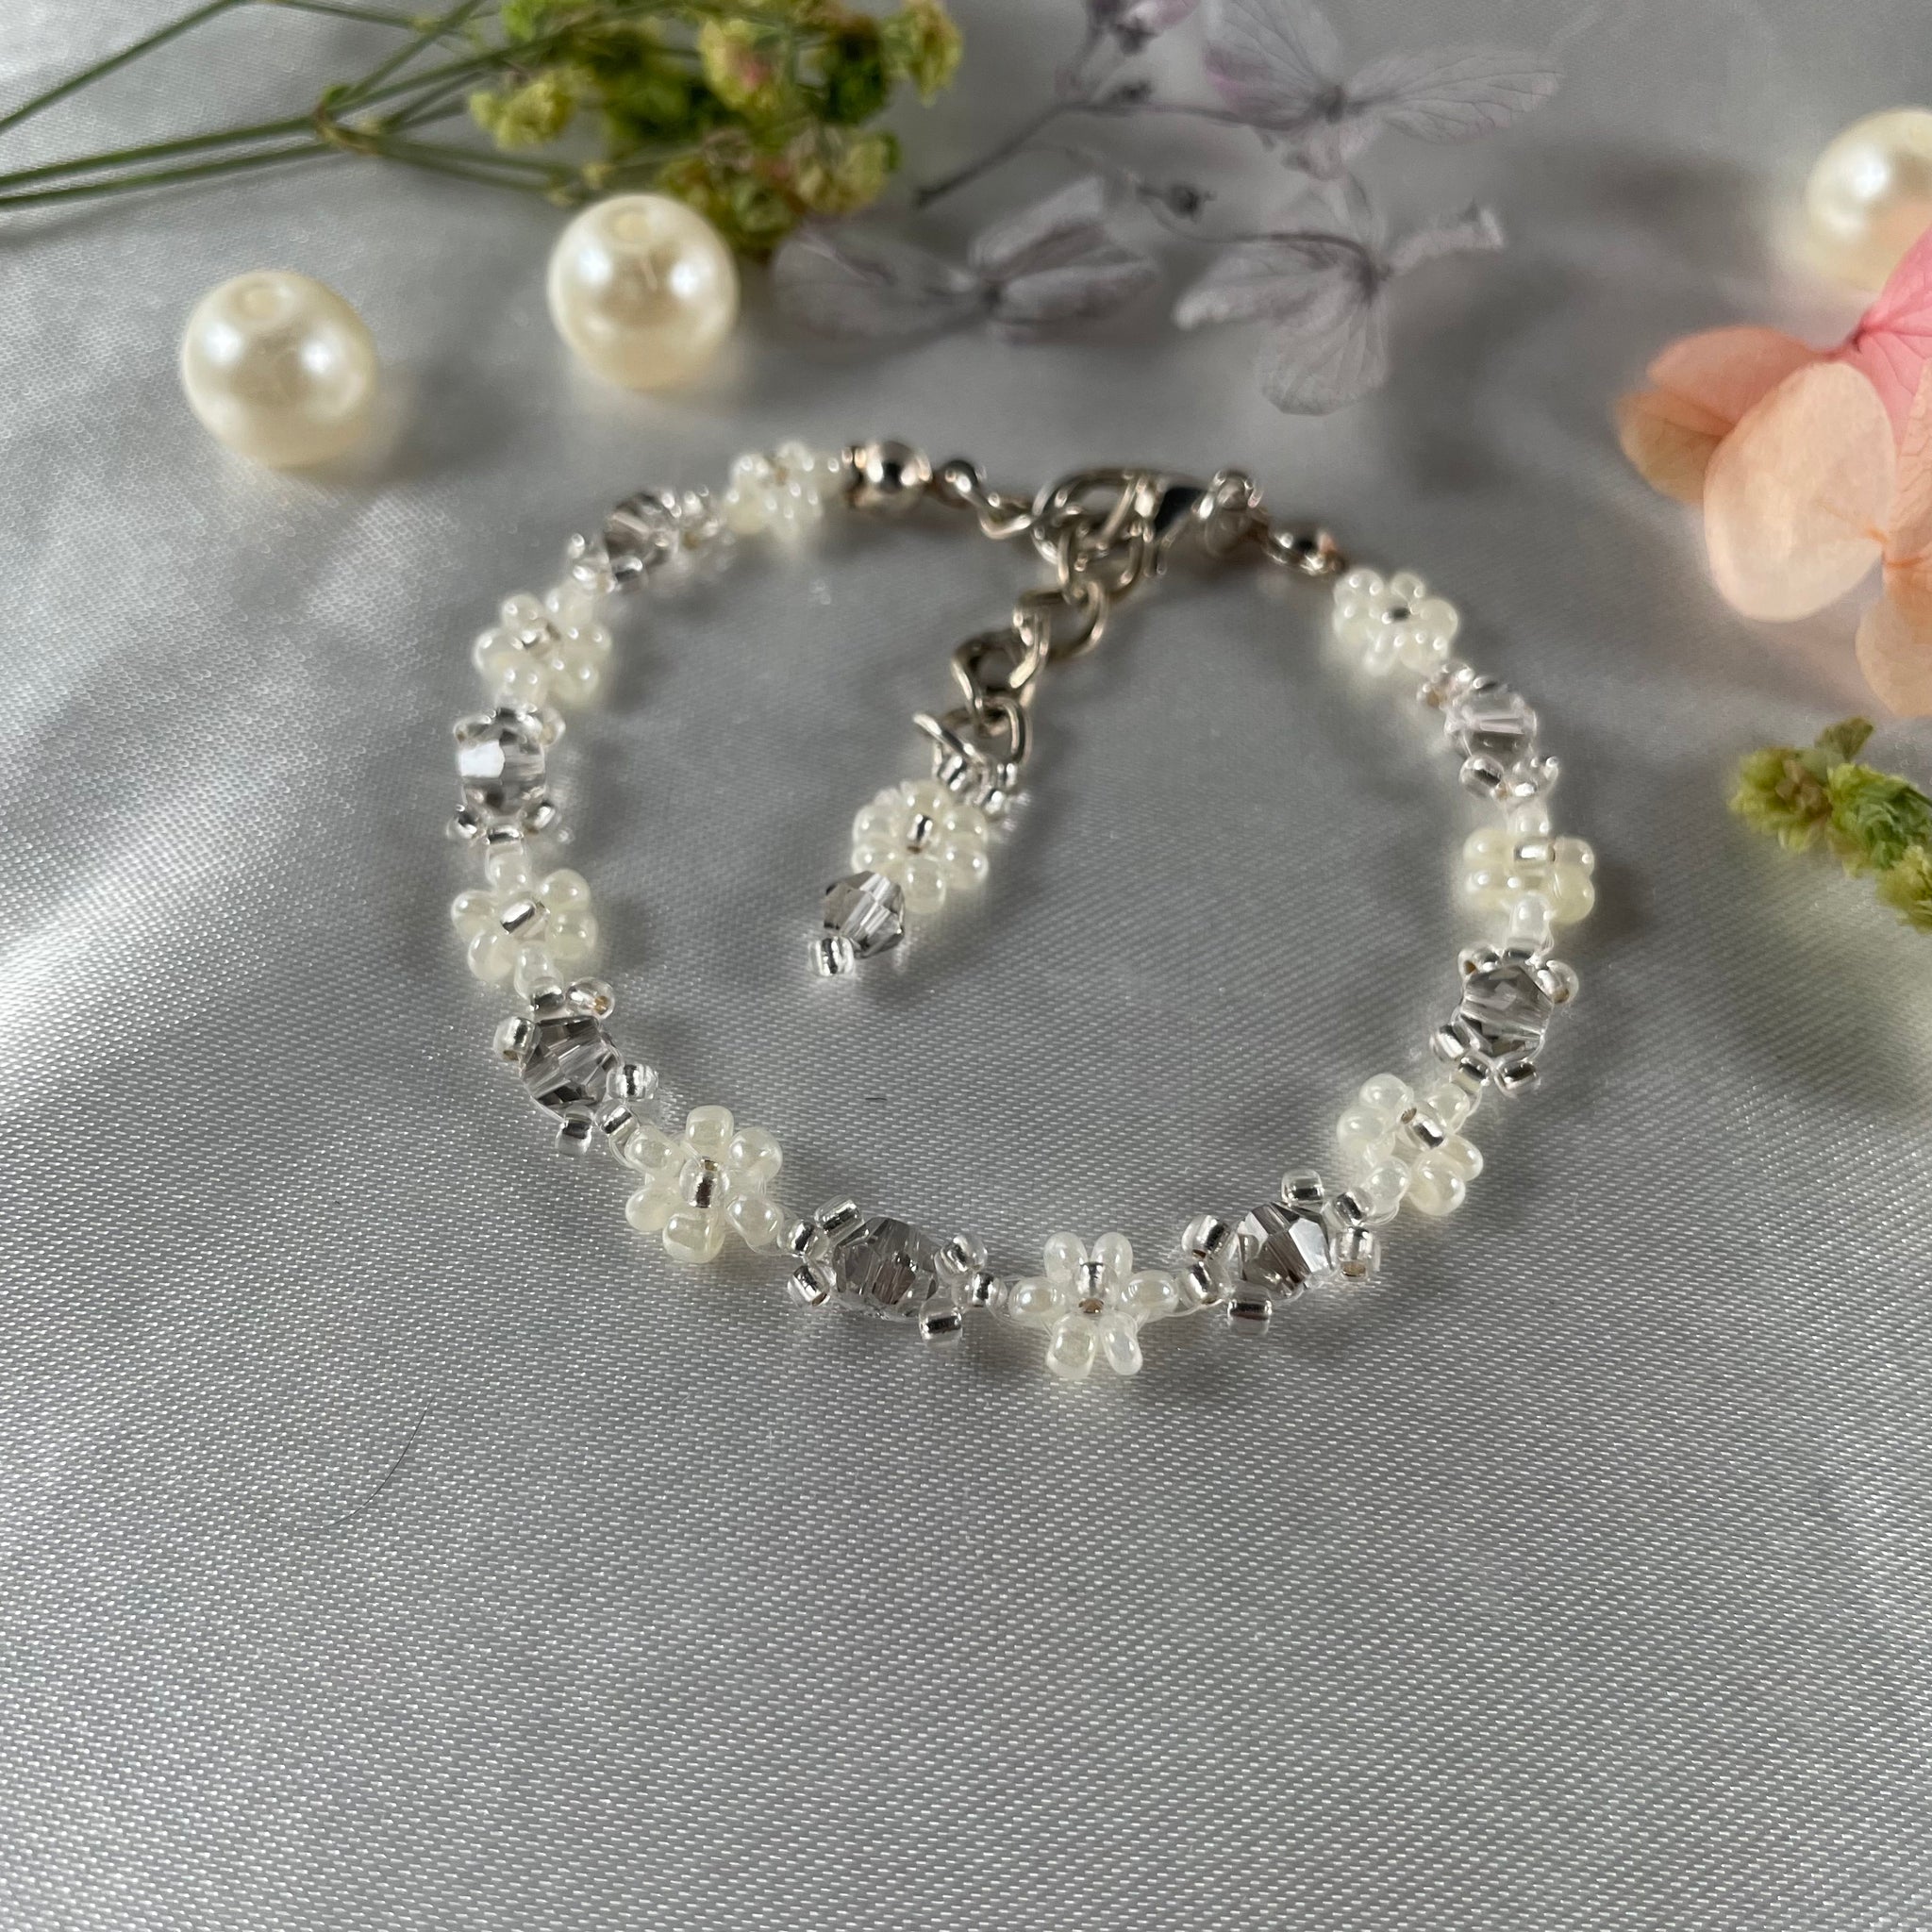 Daisy Flowers bracelet with Crystal made with colour Light grey and Off-white seed Beads with Silver line beads finishing combination